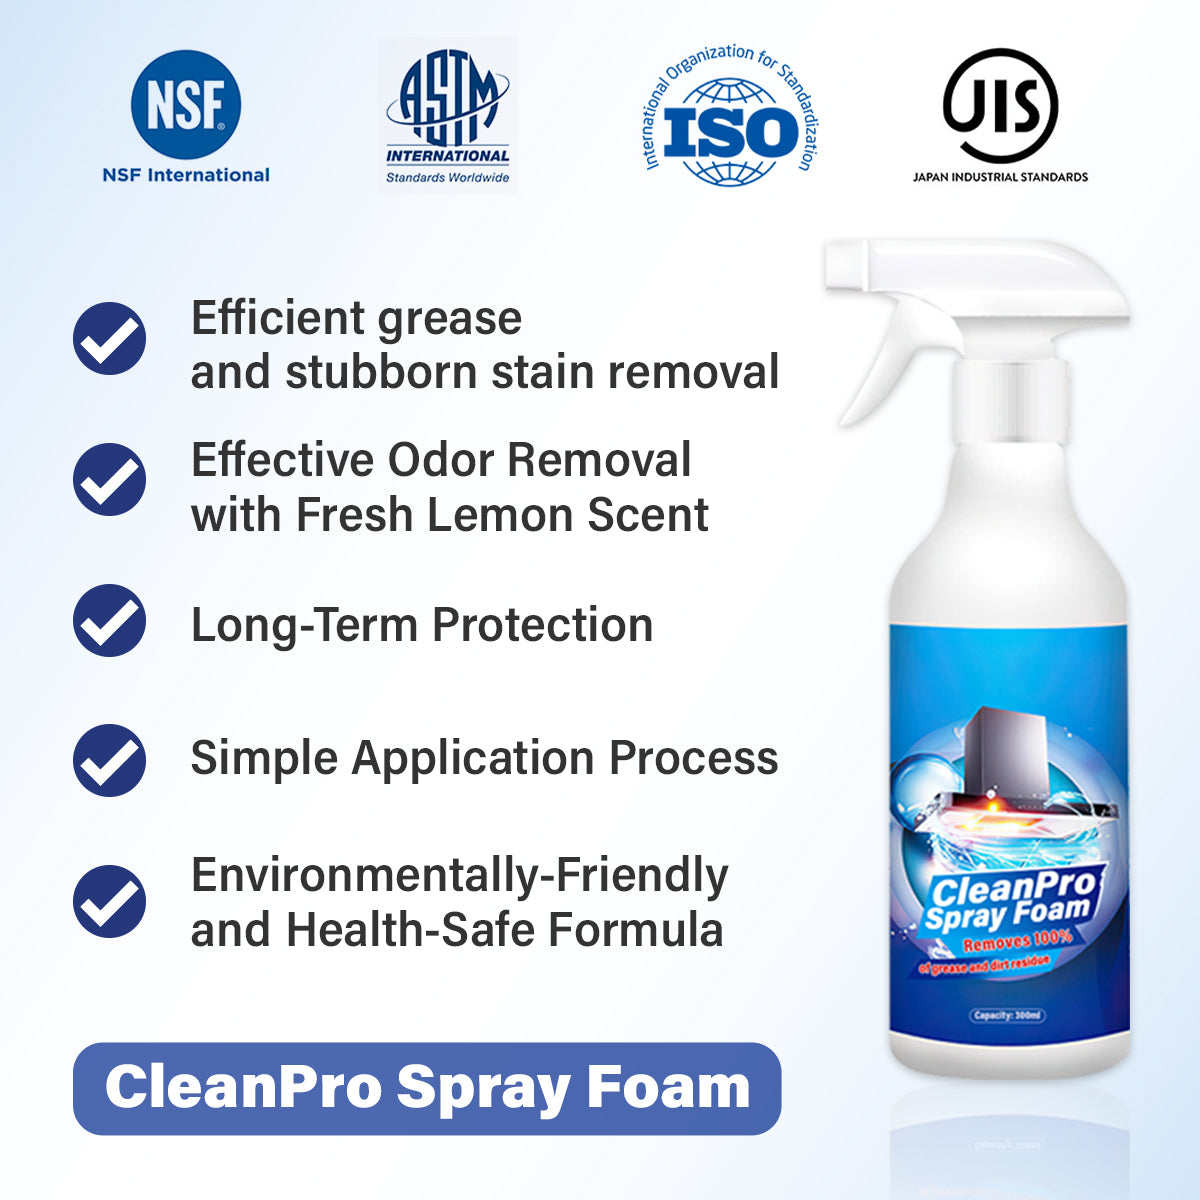 CleanPro Spray Foam: Your Time Saved, My Quality Delivered